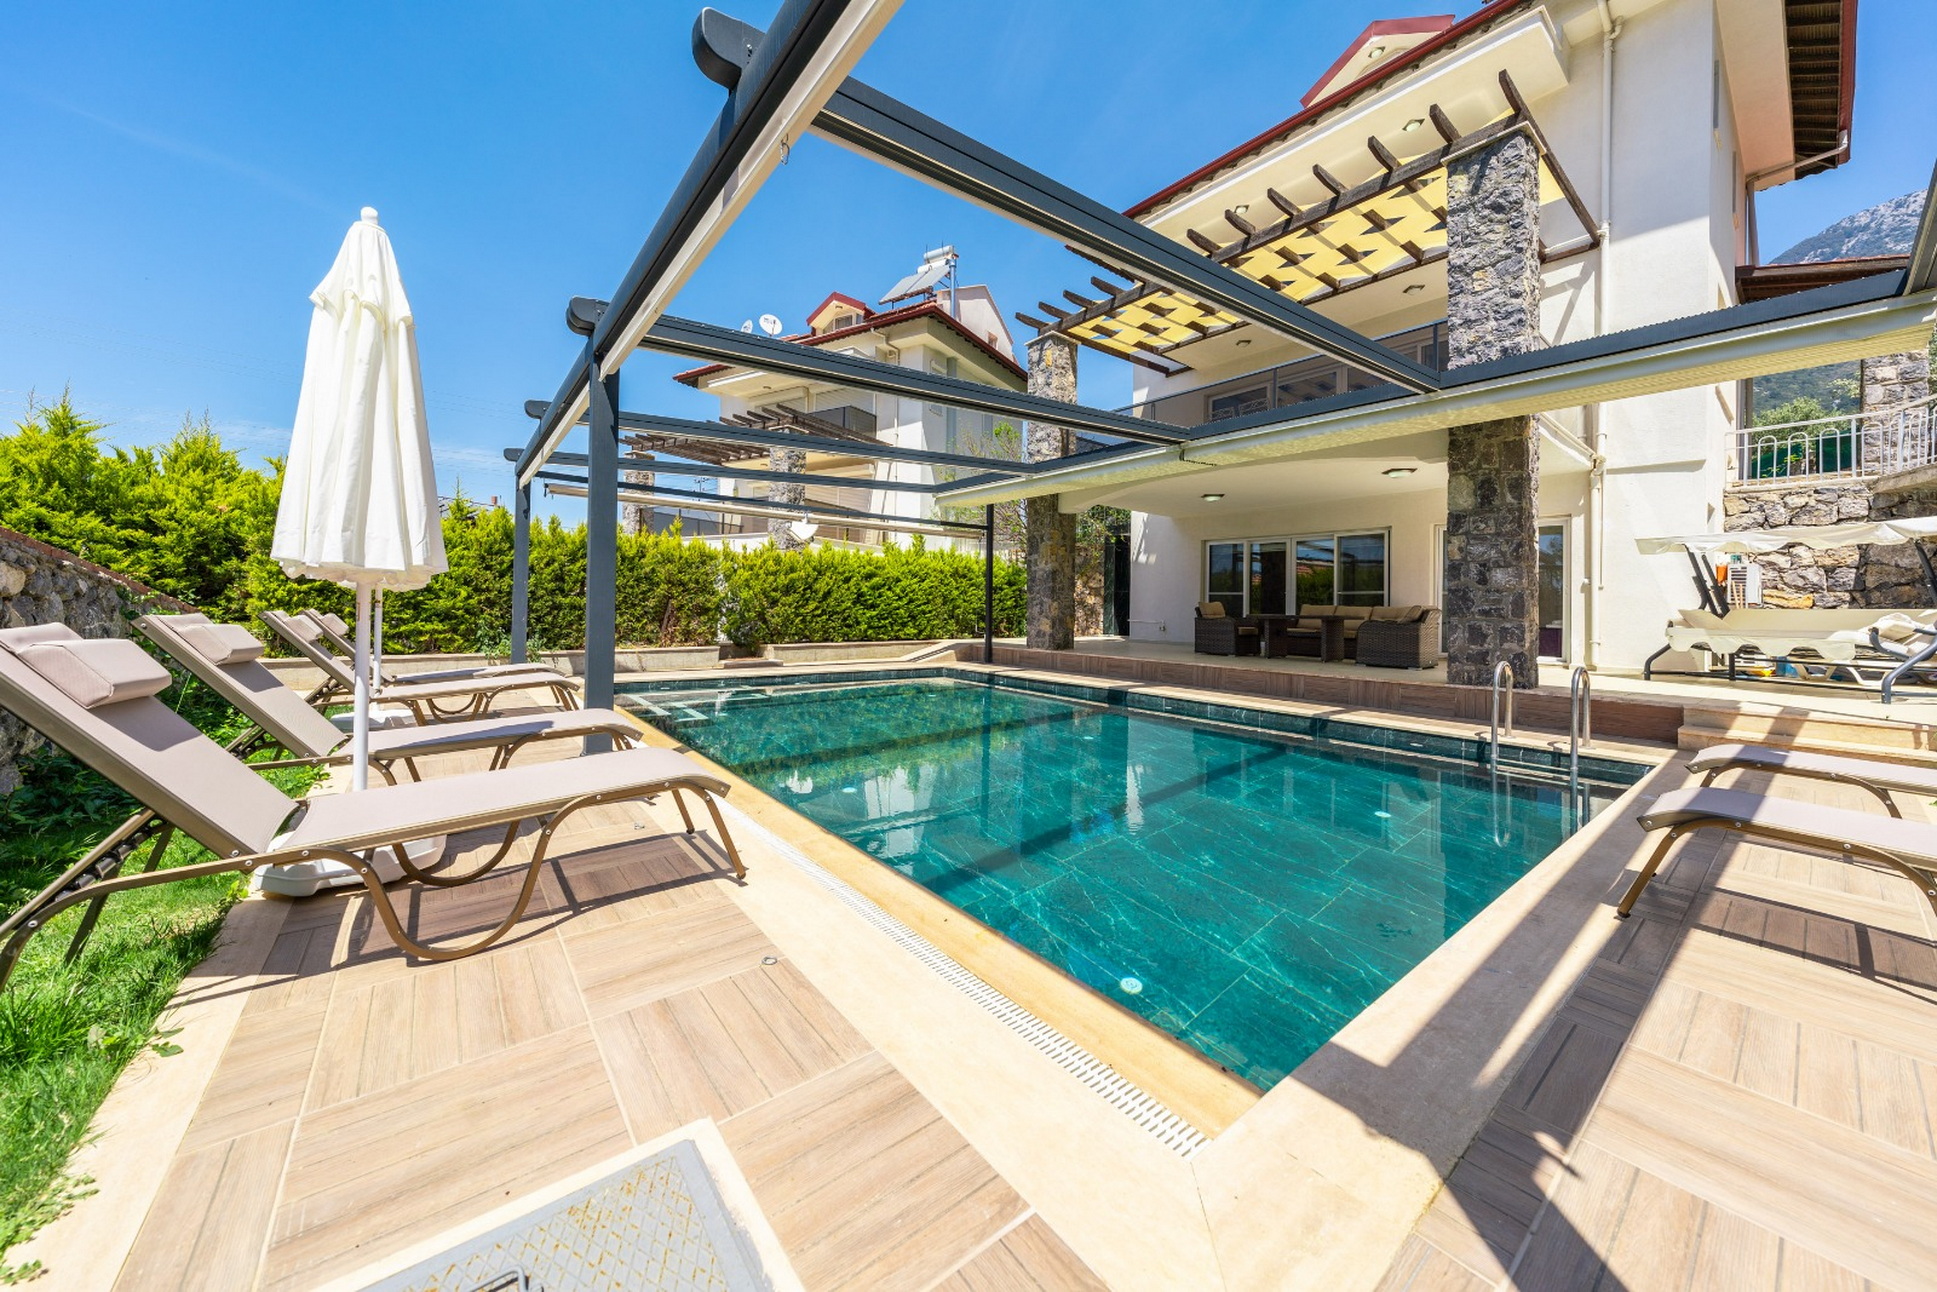 5 Bedroom Triplex Villa with Private Pool and Mountain View